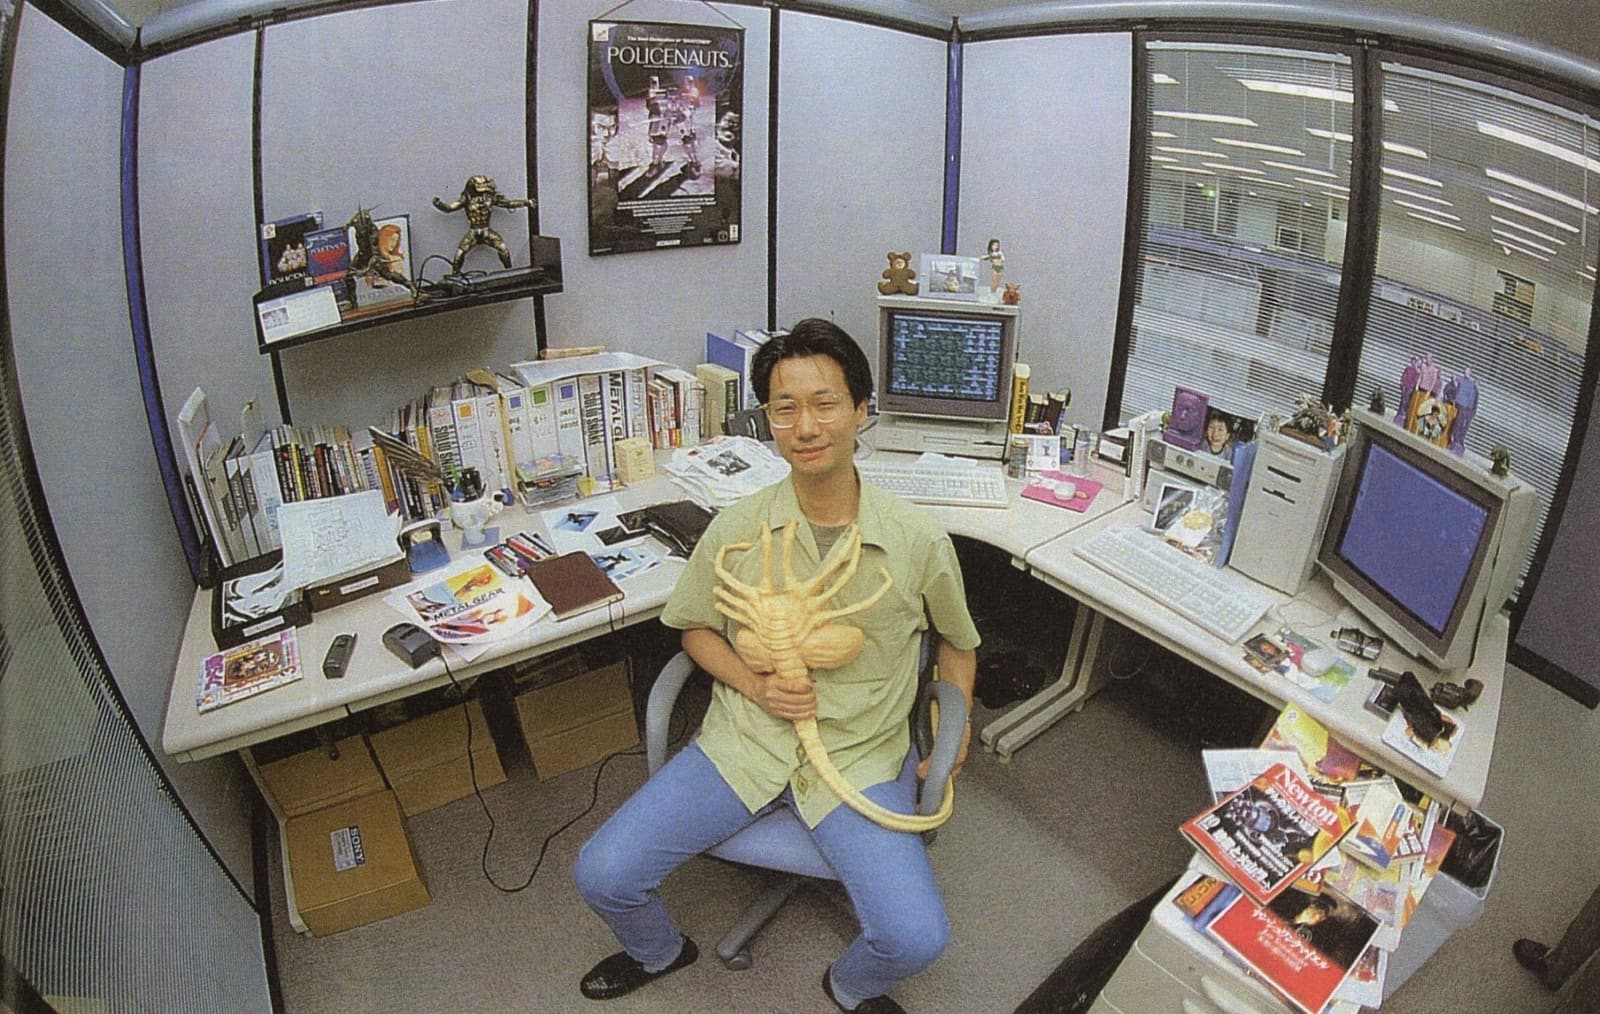 Hideo Kojima sitting turned away from his U-shaped desk in the late 90s. The desk has two CRT monitors and computers, and the rest of it is filled with stuff. Books, papers, magazines, CDs, photos, and toys. Kojima-san looks at the camera with a smile, holding a facehugger replica from the movie Alien.